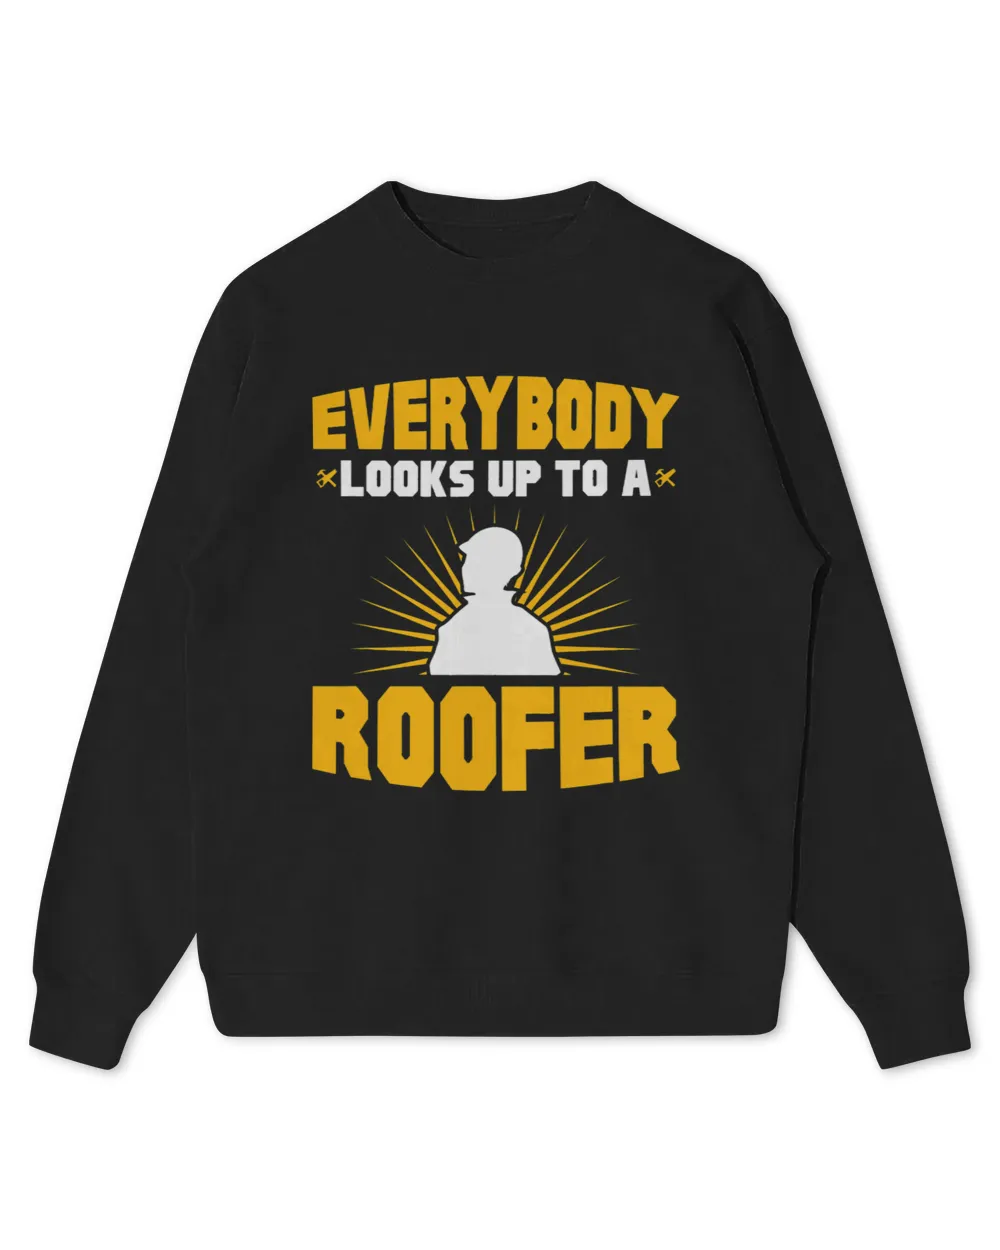 Everybody Looks Up To A Roofer Roofing Roof Construction